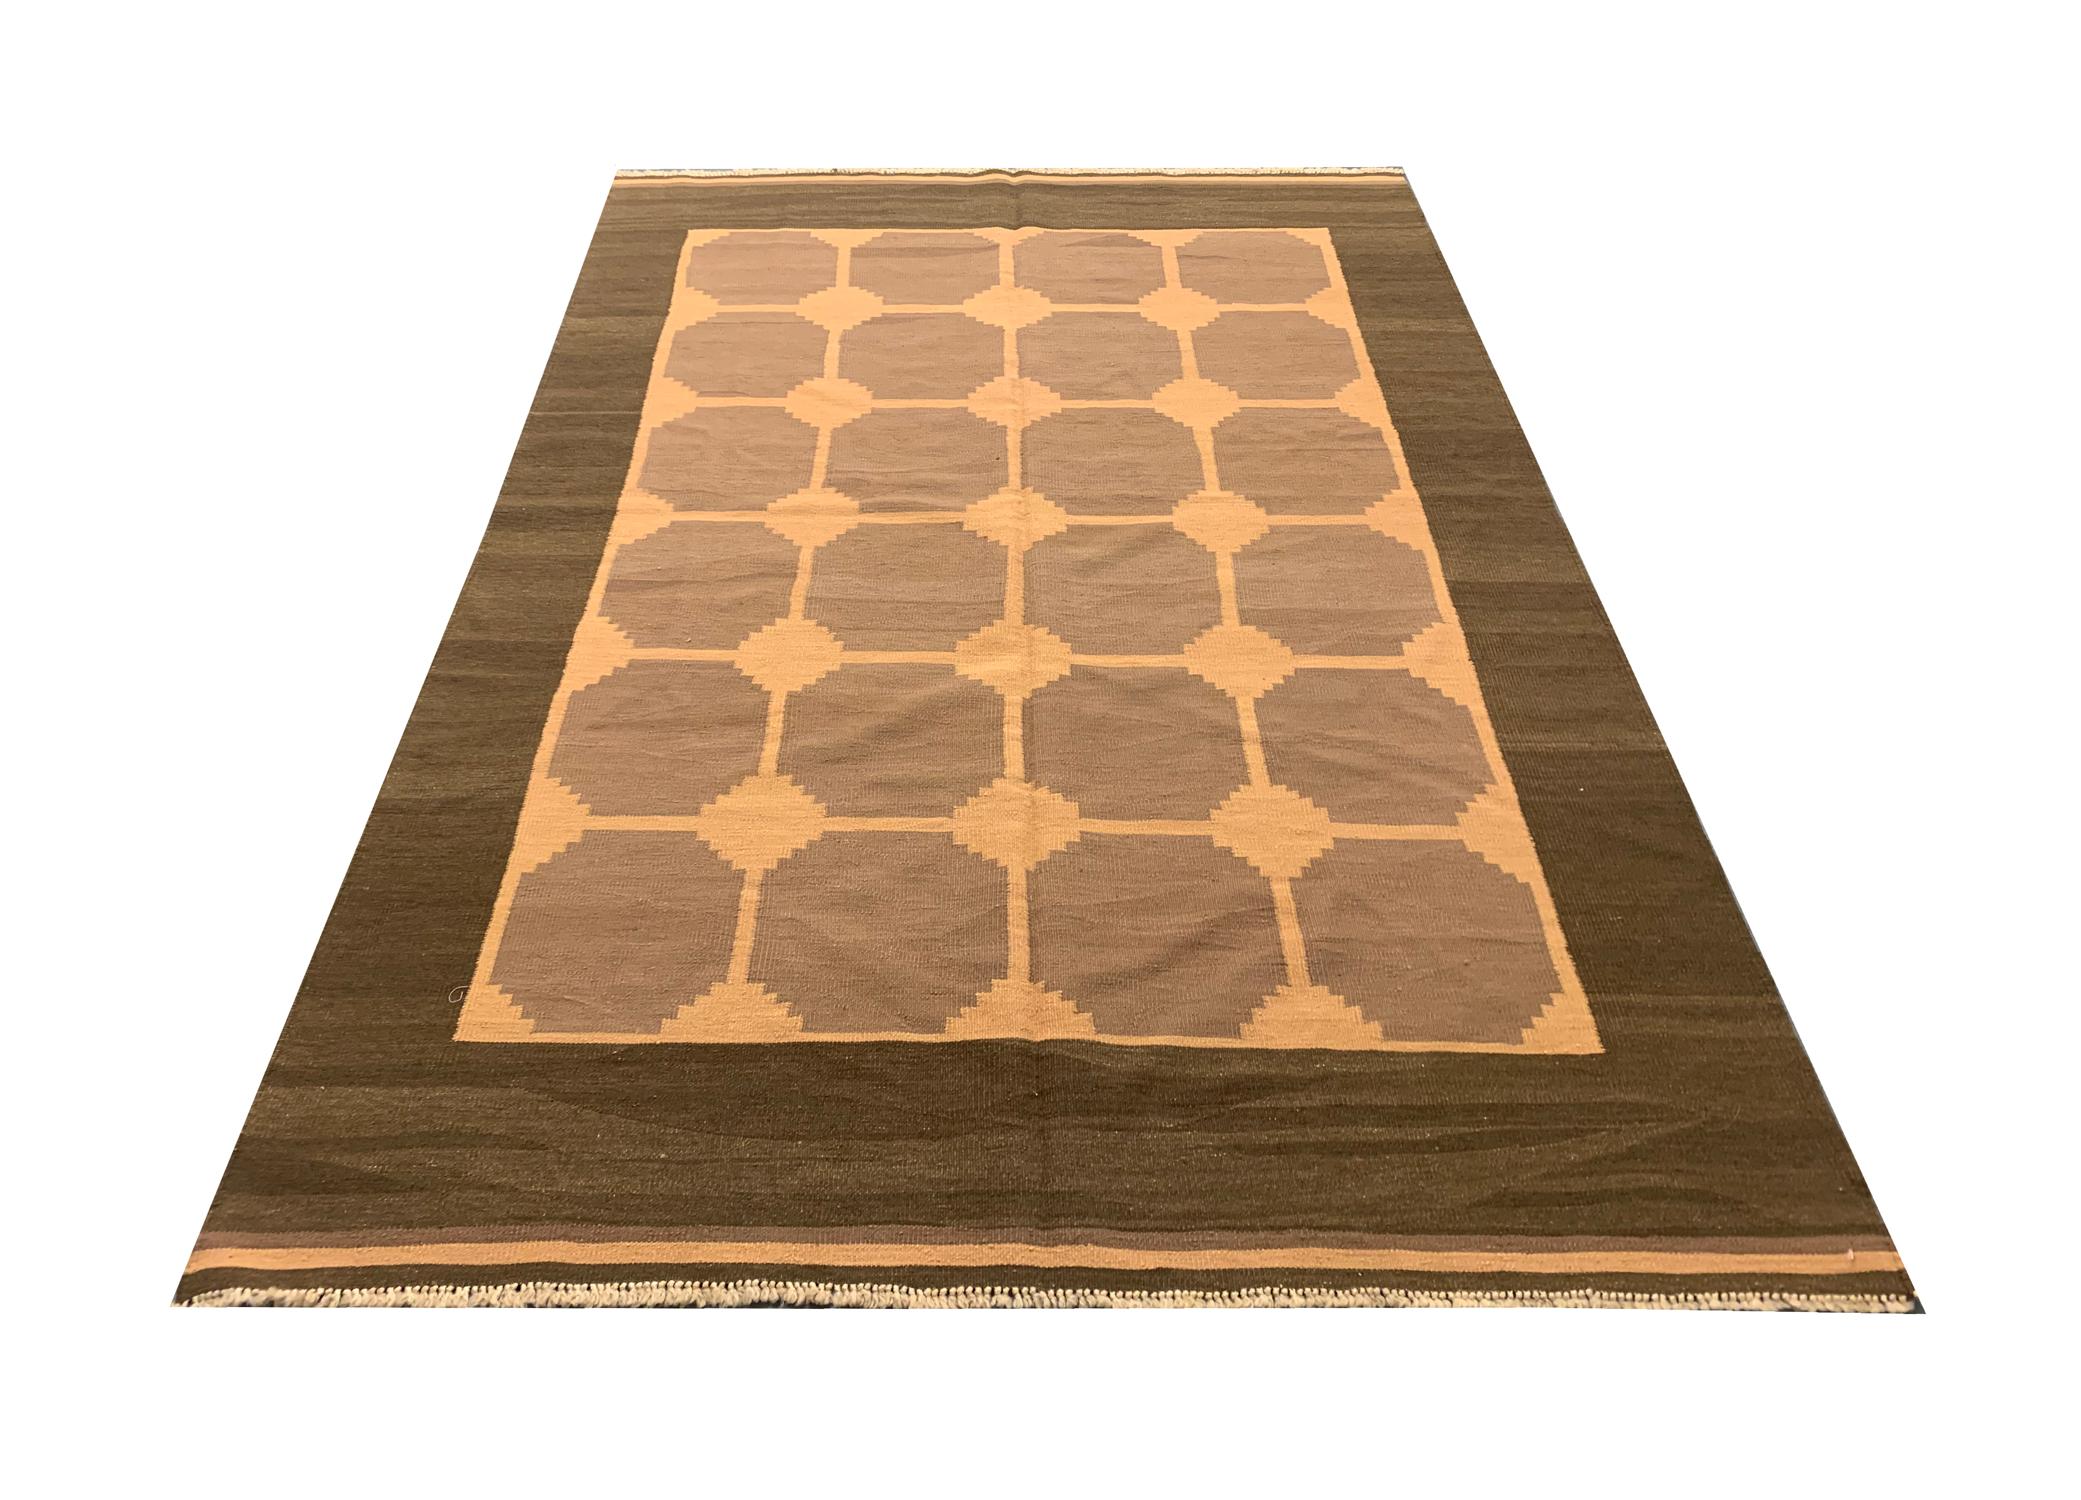 This elegant wool area rug was woven by hand in the 1960s in the Caucasus area. The design features a bold art deco style with a repeat geometric pattern—Woven with a subtle colour palette including orange, brown and beige. The colour and design of